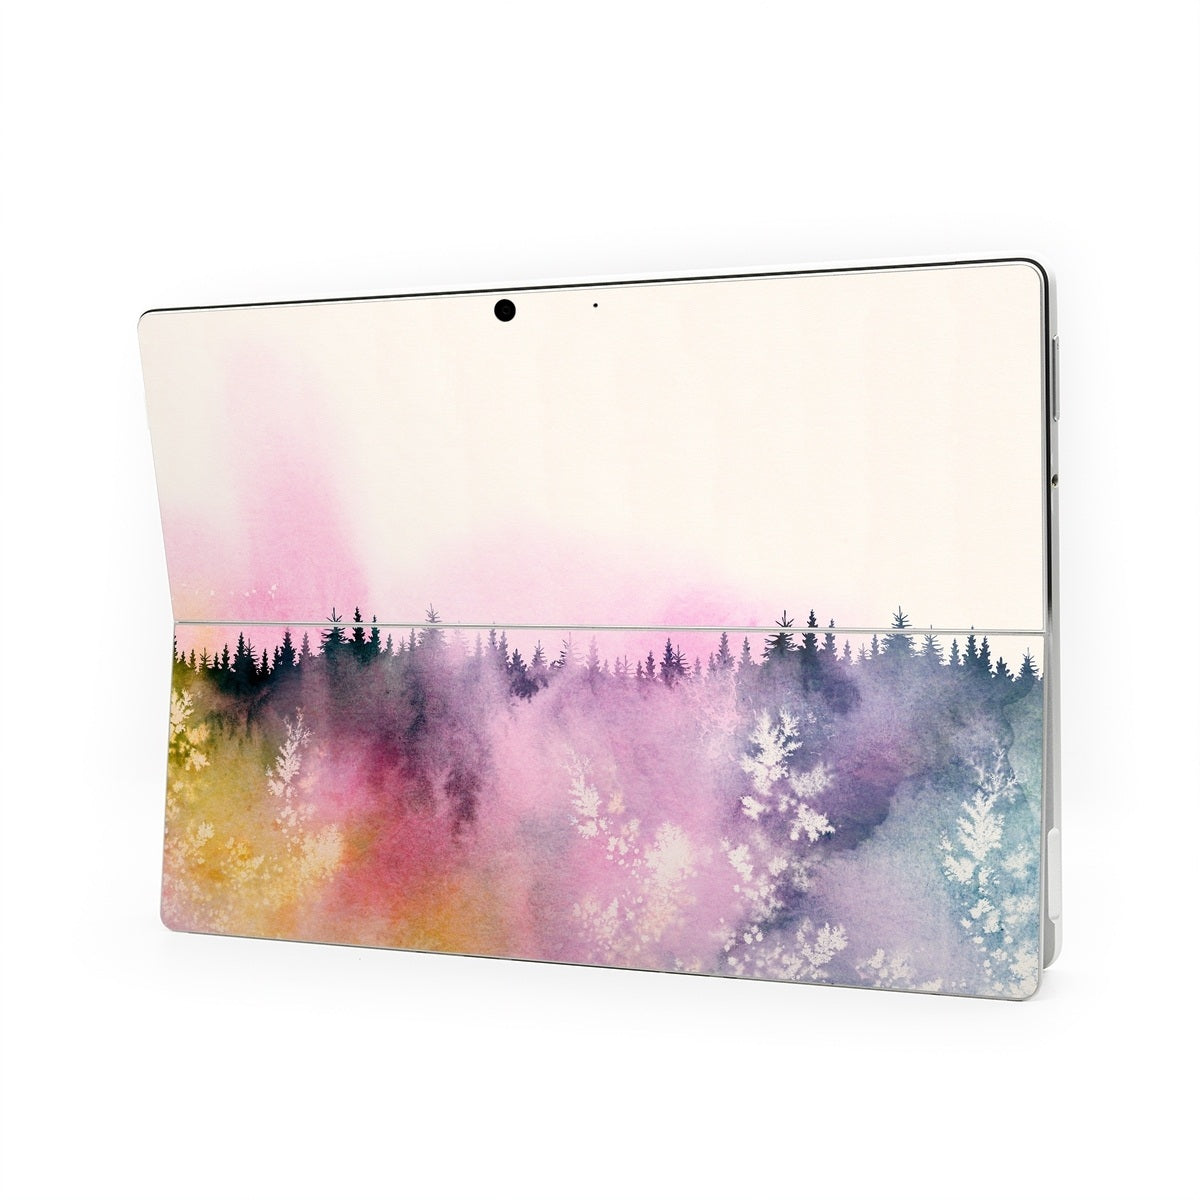 Dreaming of You - Microsoft Surface Pro Skin